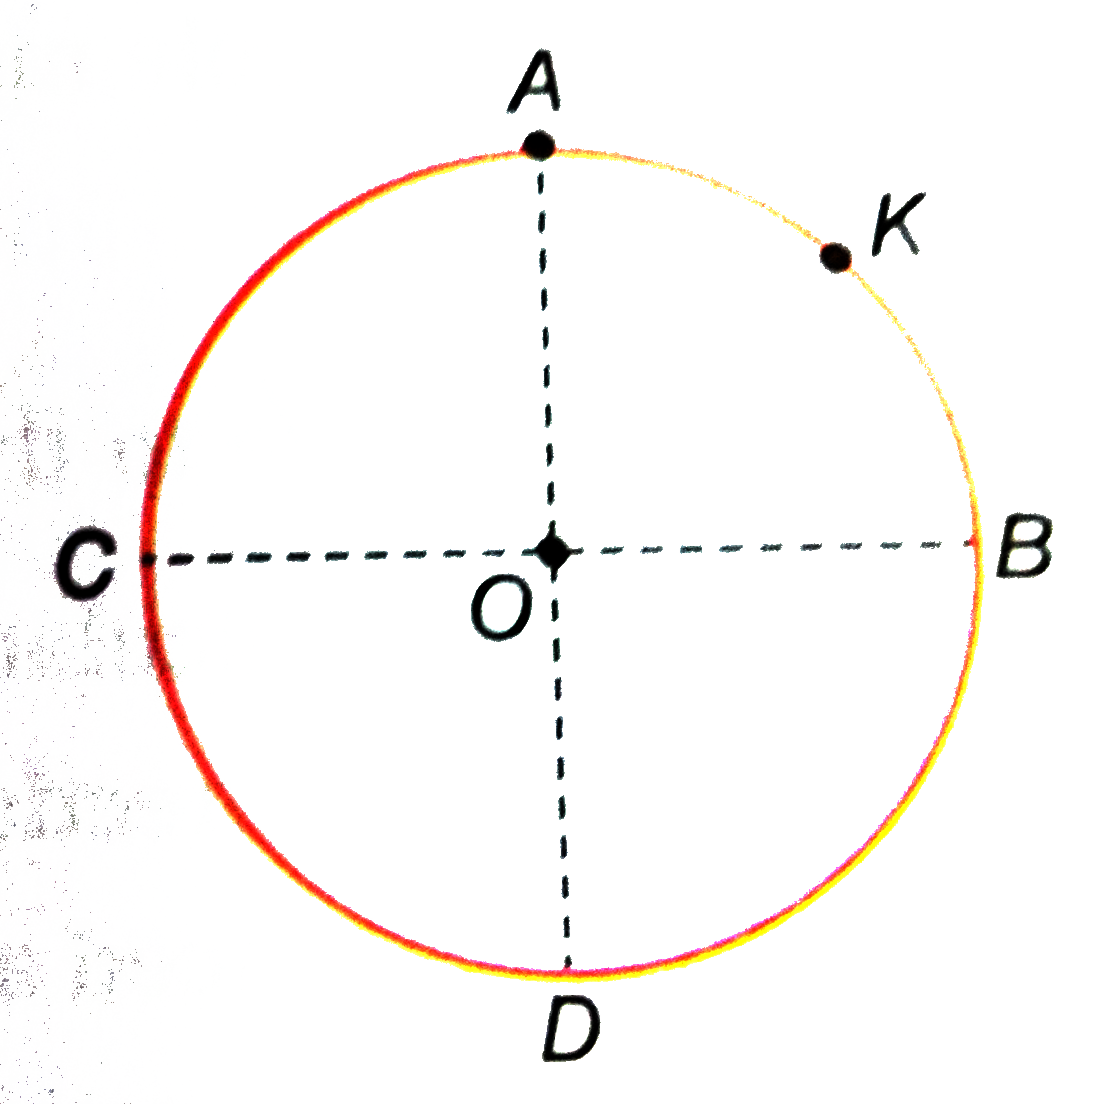 A thin conducting ring of radius R  is given a charge +Q. The electric field at the centre O of the ring  due to the charge on the part AKB of the  ring  is E. The electric field at the centre  due to the charge on the part ACDB of the ring is